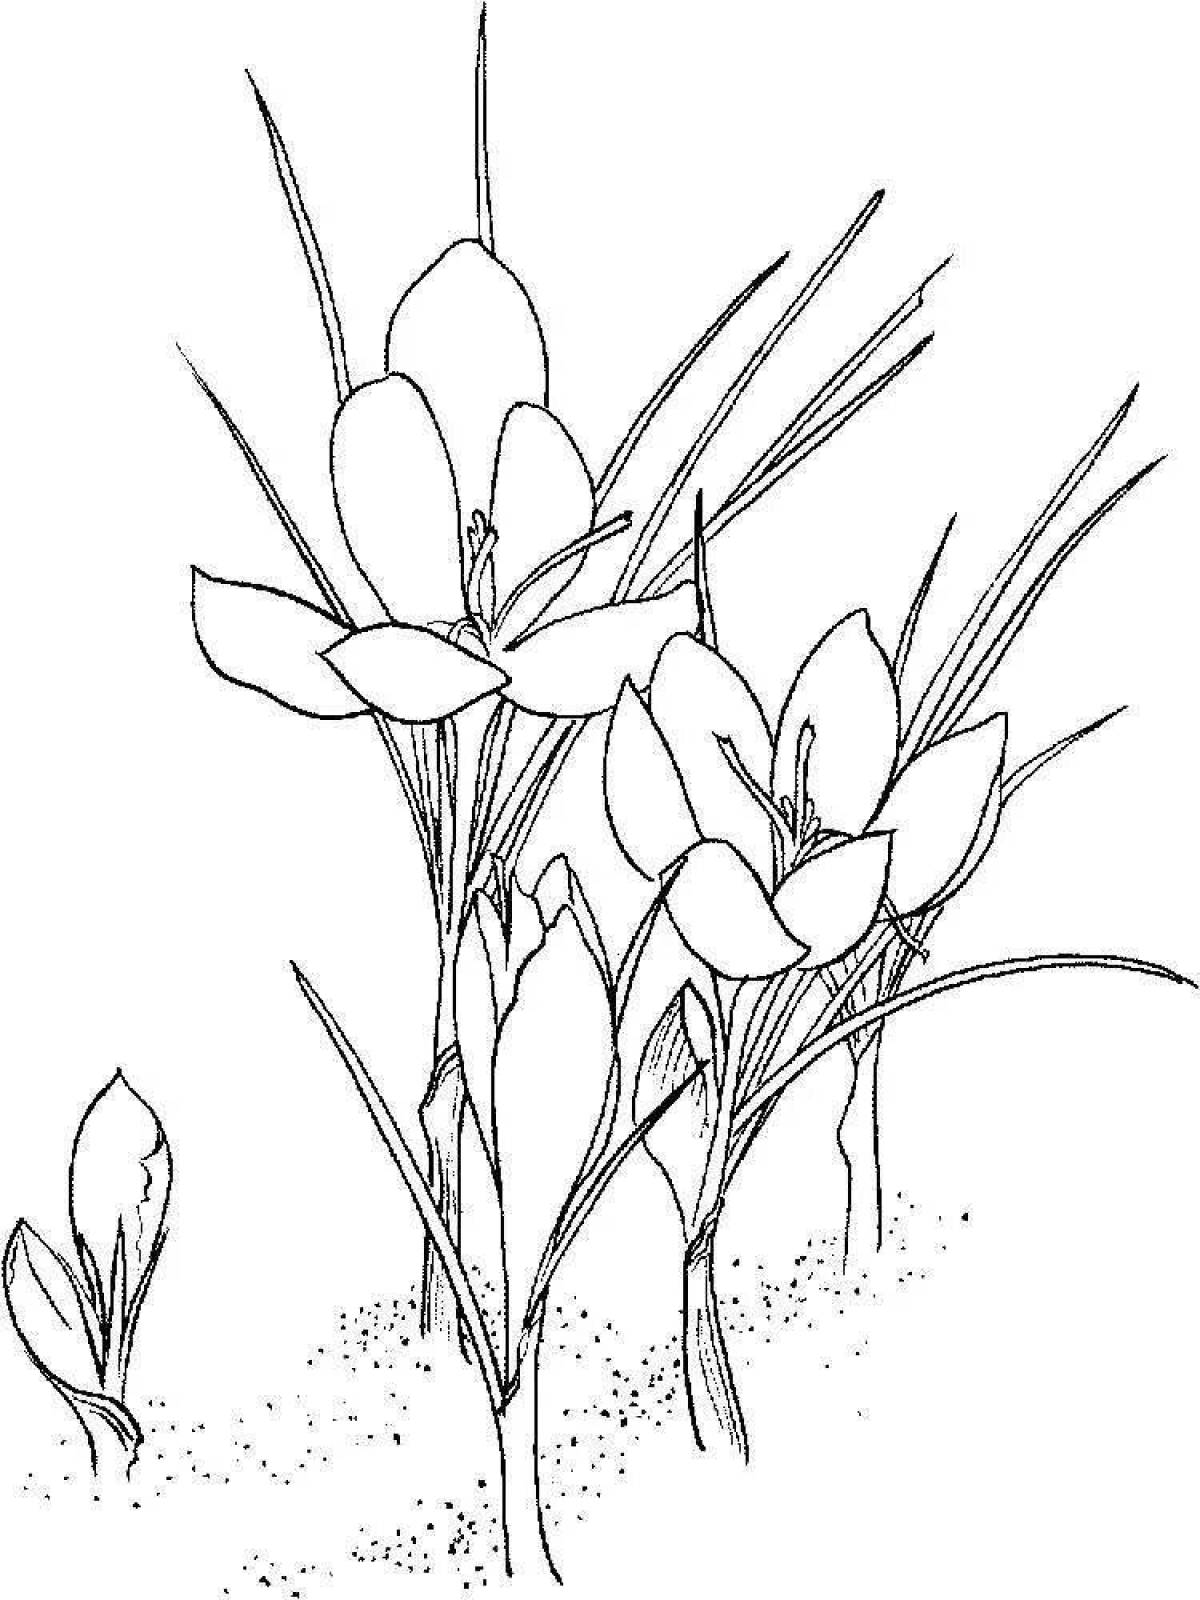 Fun grass coloring page